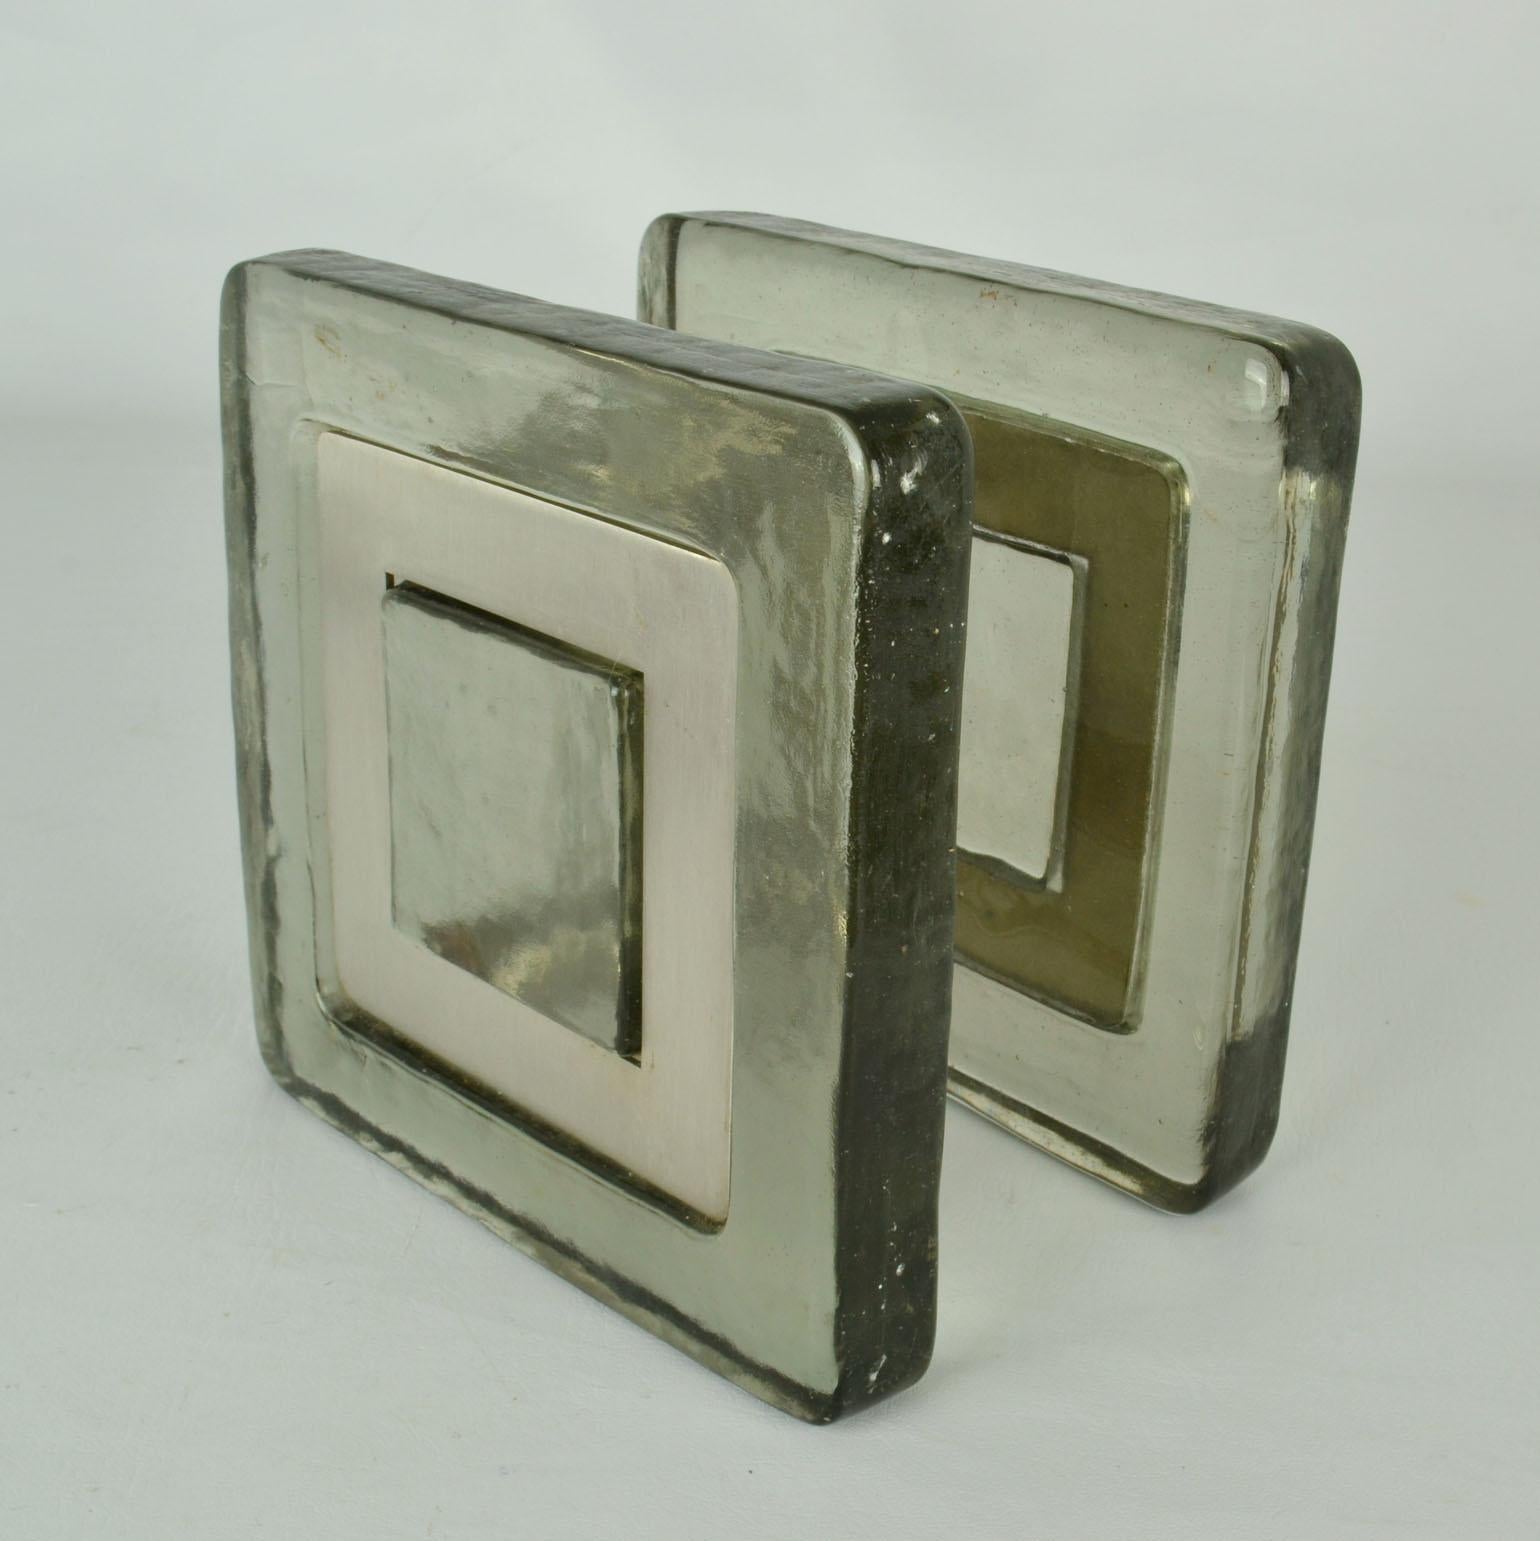 European Pair of Architectural Square Tinted Glass Push Pull Door Handles